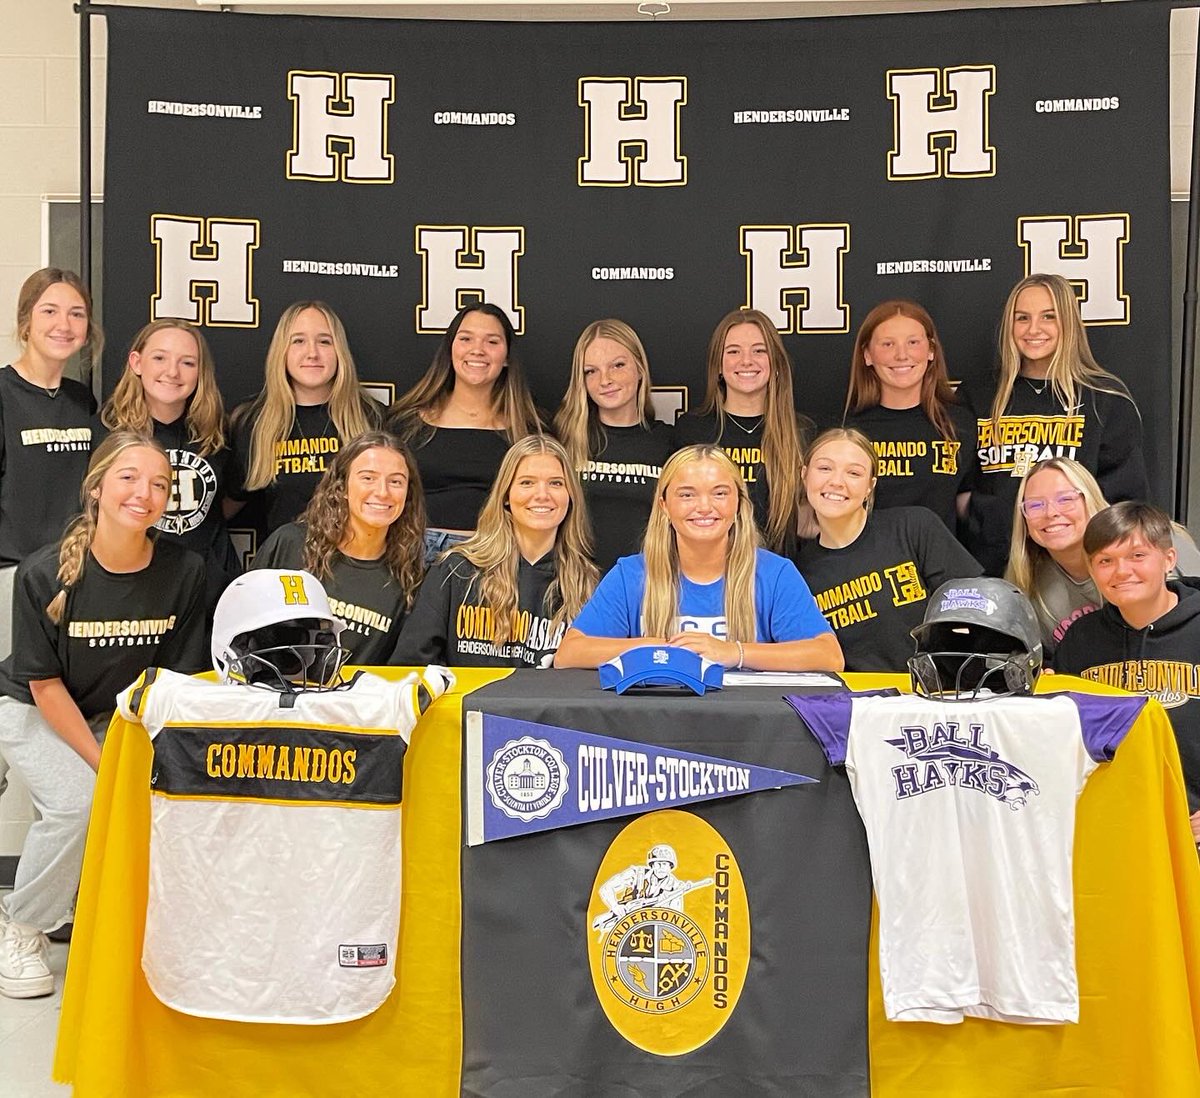 Congratulations to Haylie Wortham for signing with Culver-Stockton College! We are proud of you! #commandopride